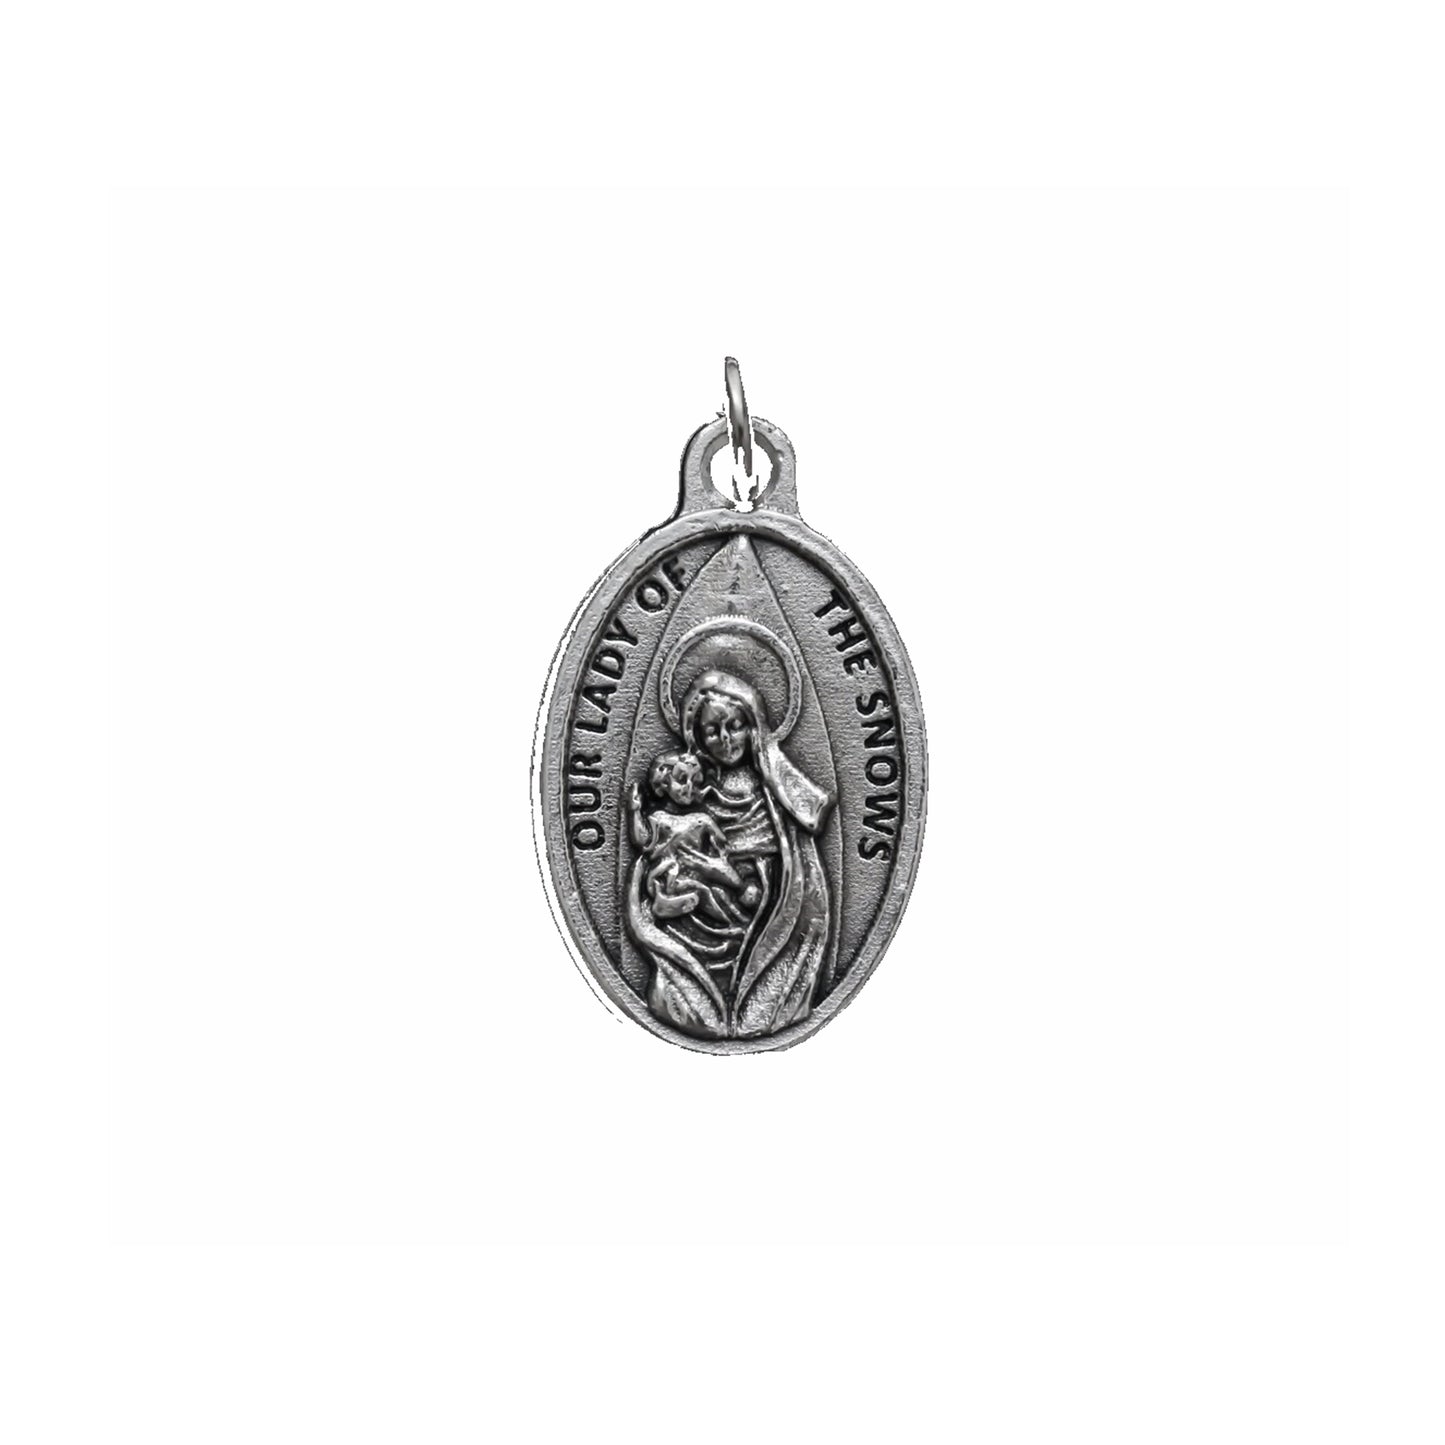 Our Lady of the Snows Patron Saint of The island of La Palma Card Medal and Chain